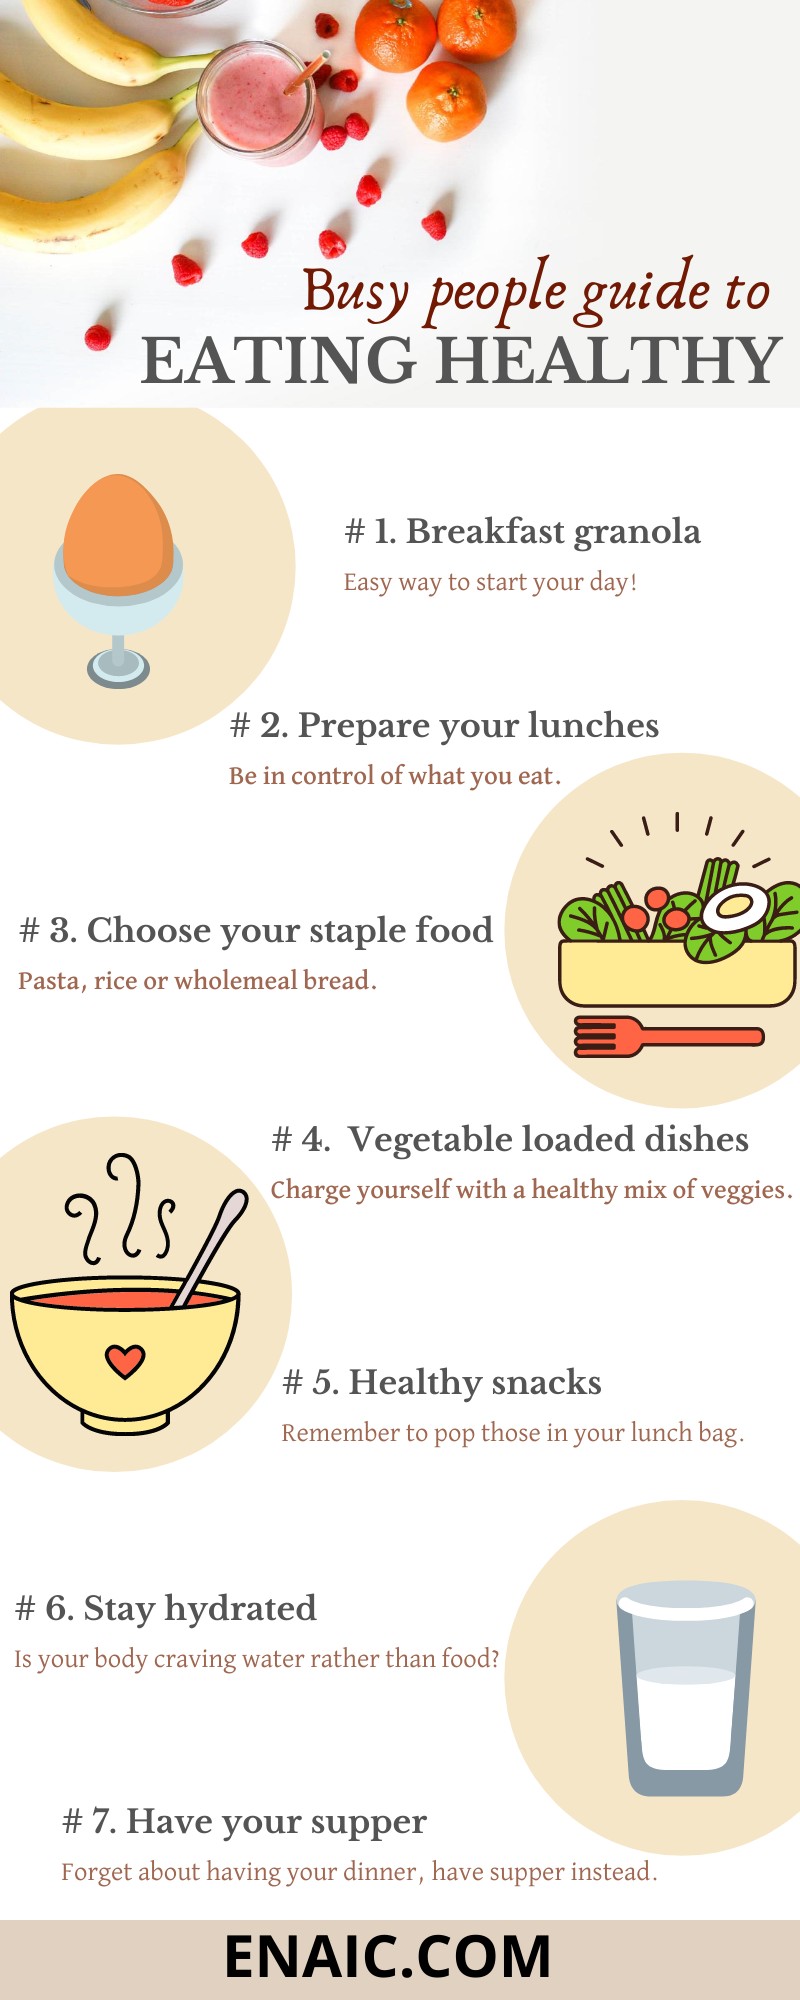 Healthy Eating Guide for Busy People